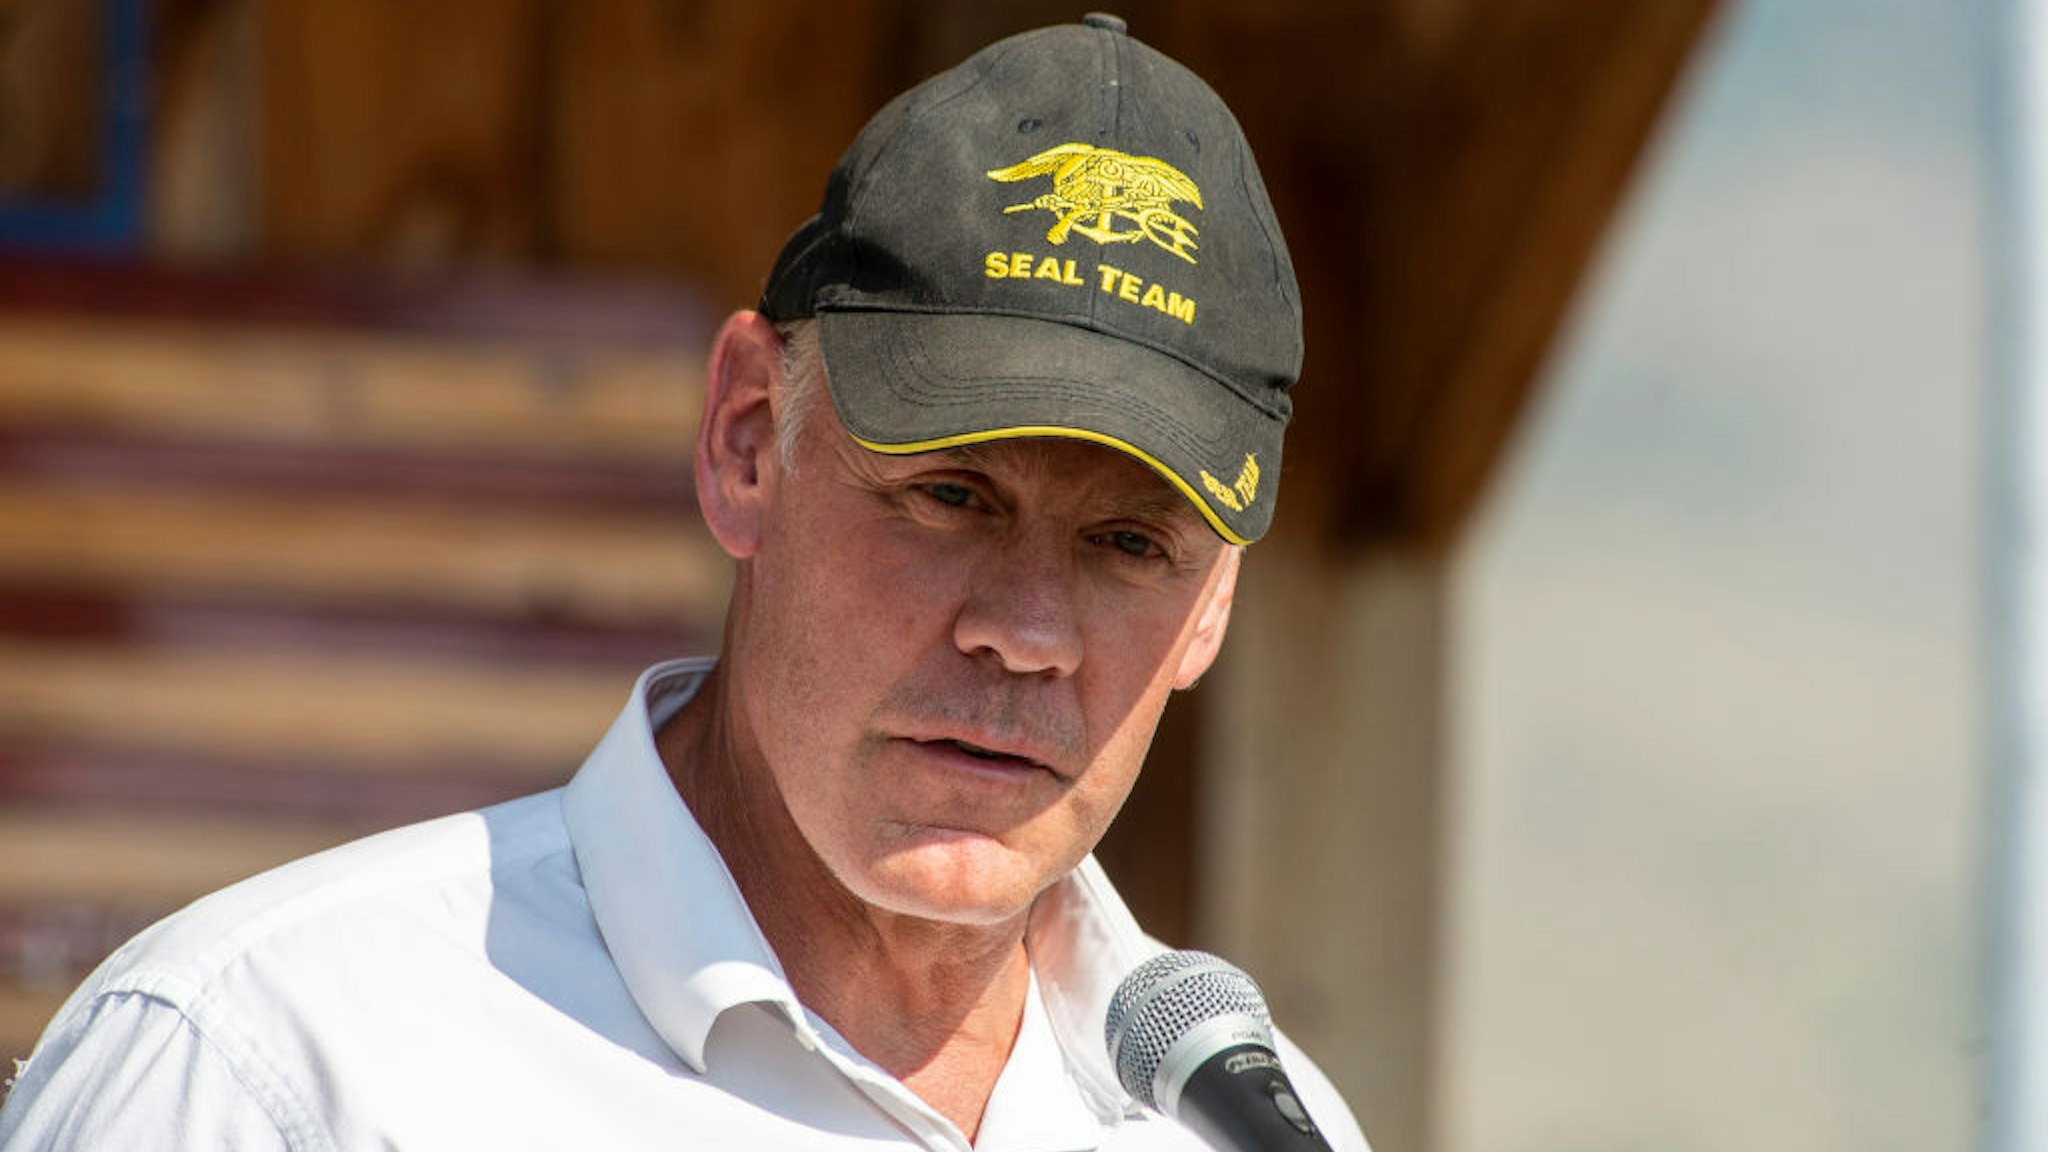 EMIGRANT, MT - JULY 24: Republican Ryan Zinke, a contender for Montanas second congressional seat, speaks at the ceremony to honor the four airman killed in a 1962 B-47 crash at 8,500 feet on Emigrant Peak on July 24, 2021 in Emigrant, Montana. A recent bipartisan Act of Congress will honor the airman with a memorial at the crash site.